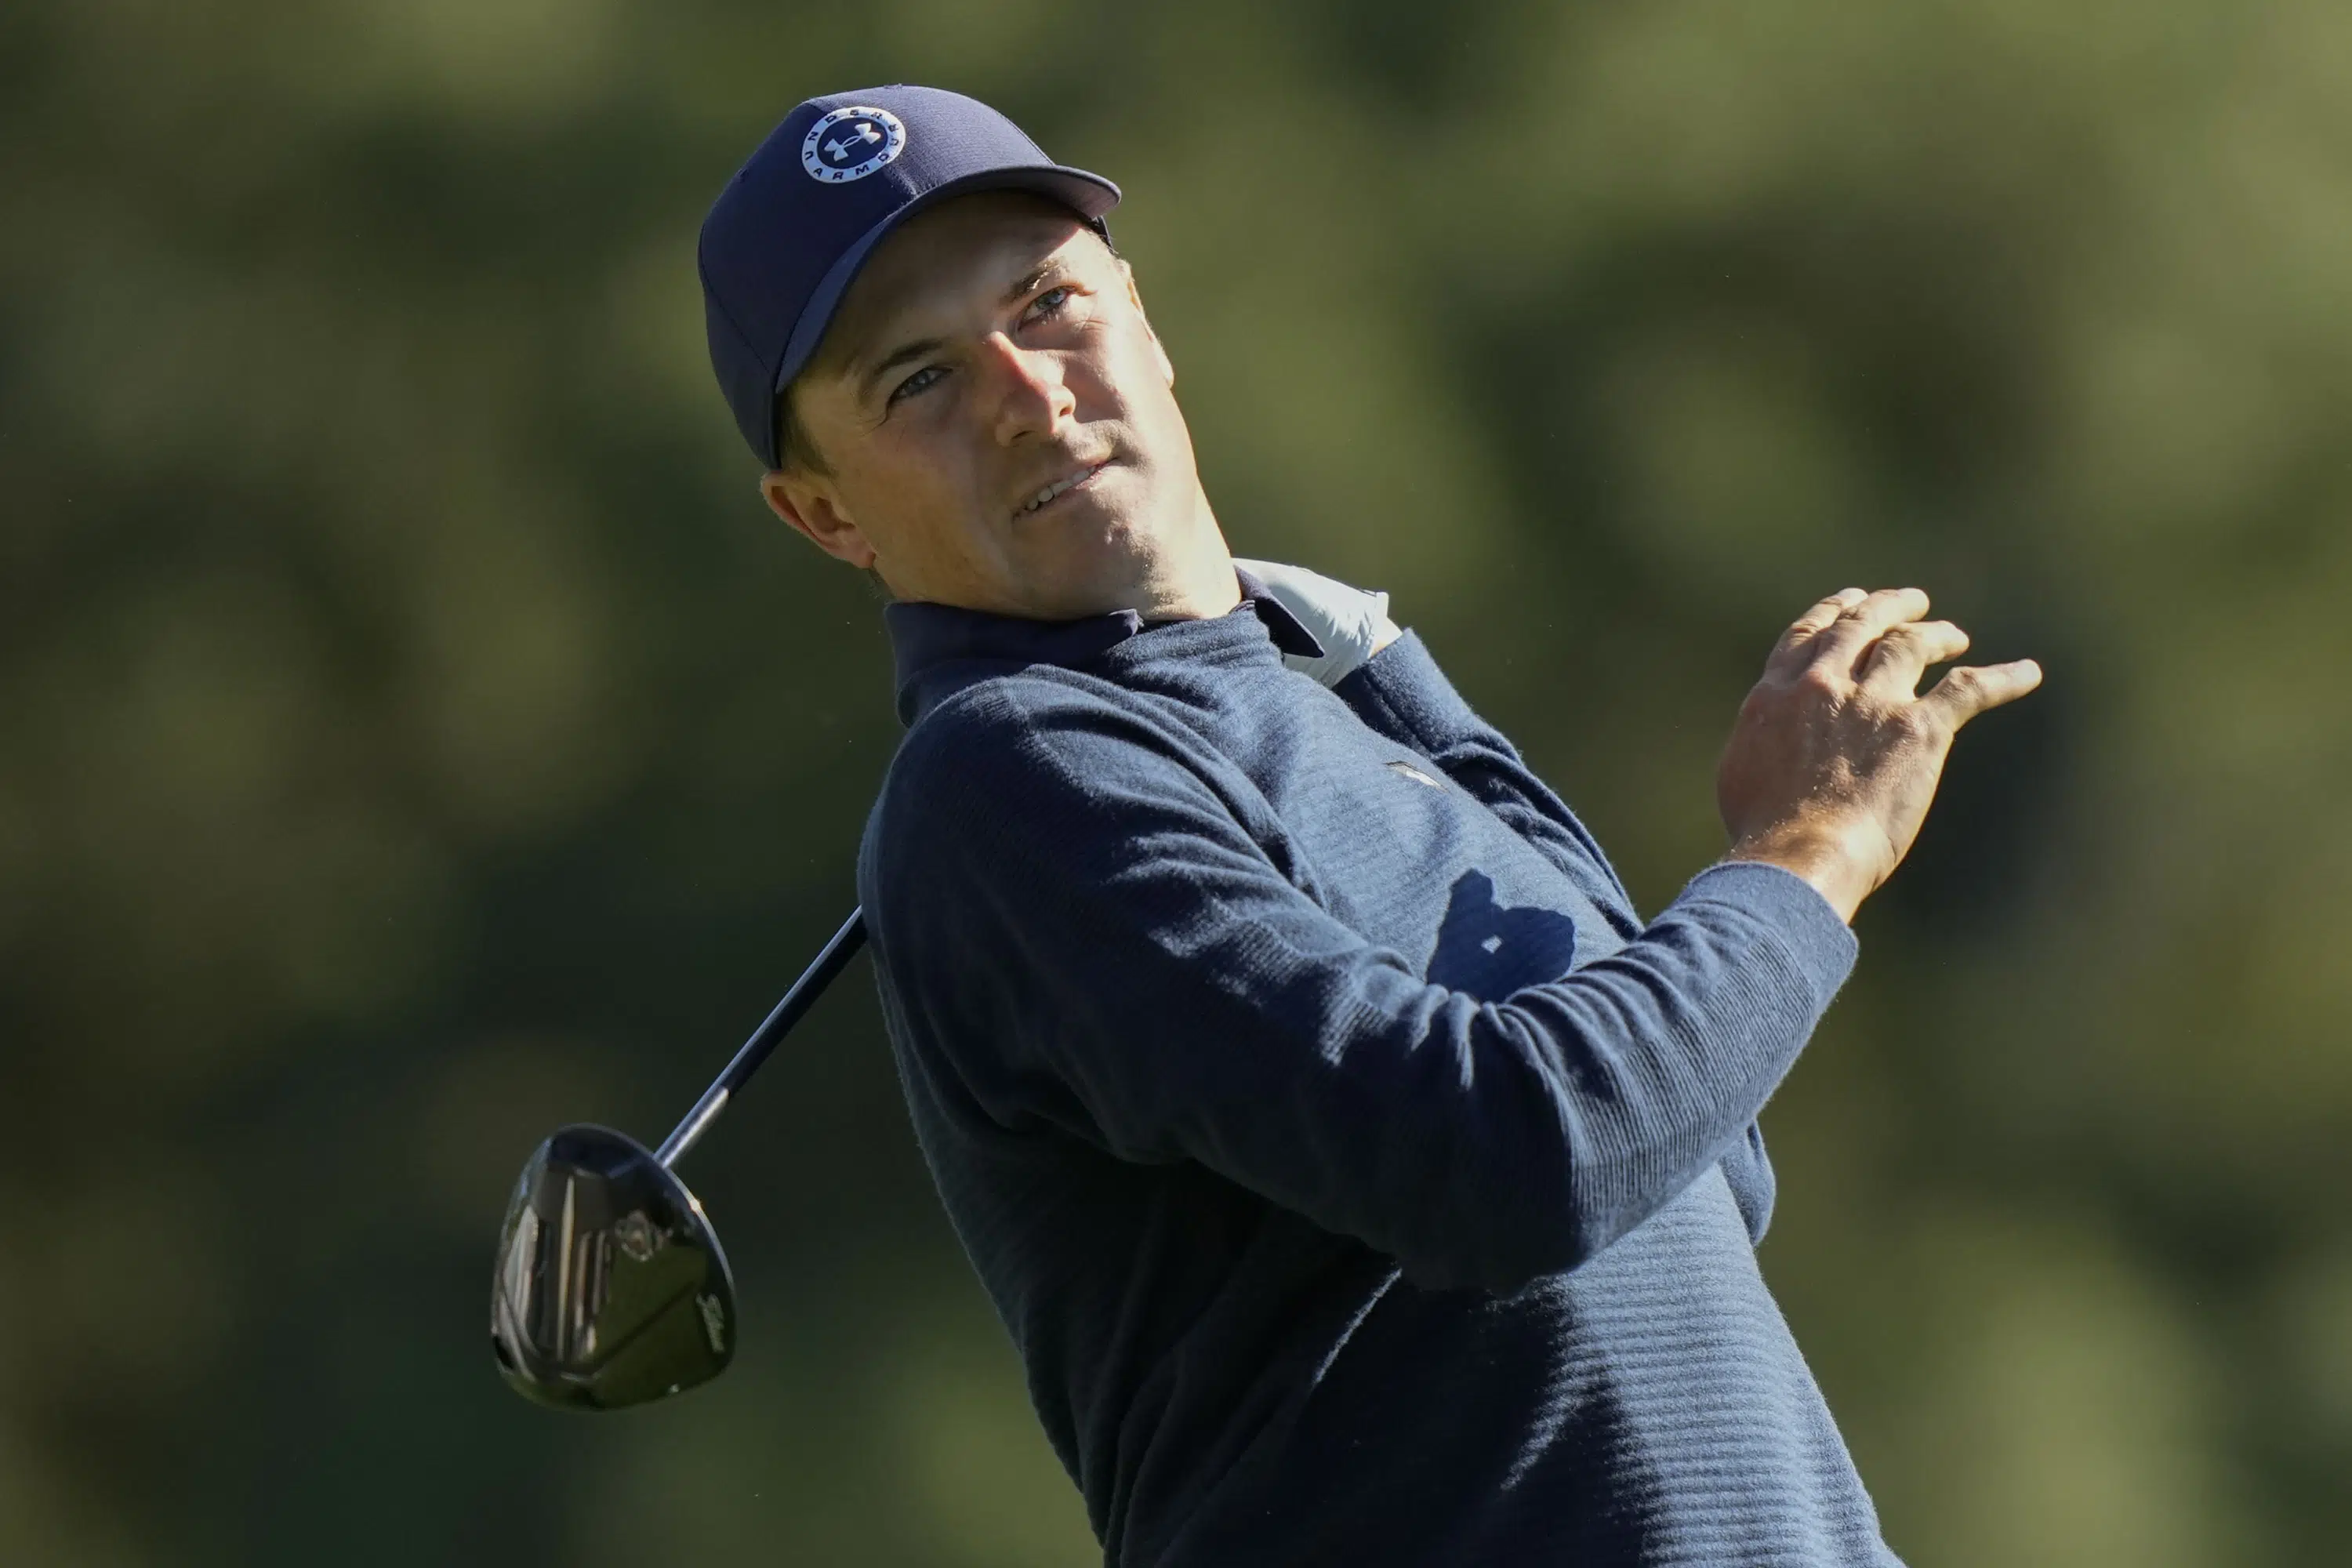 Spieth’s impressive 21 birdies at Masters not enough to win